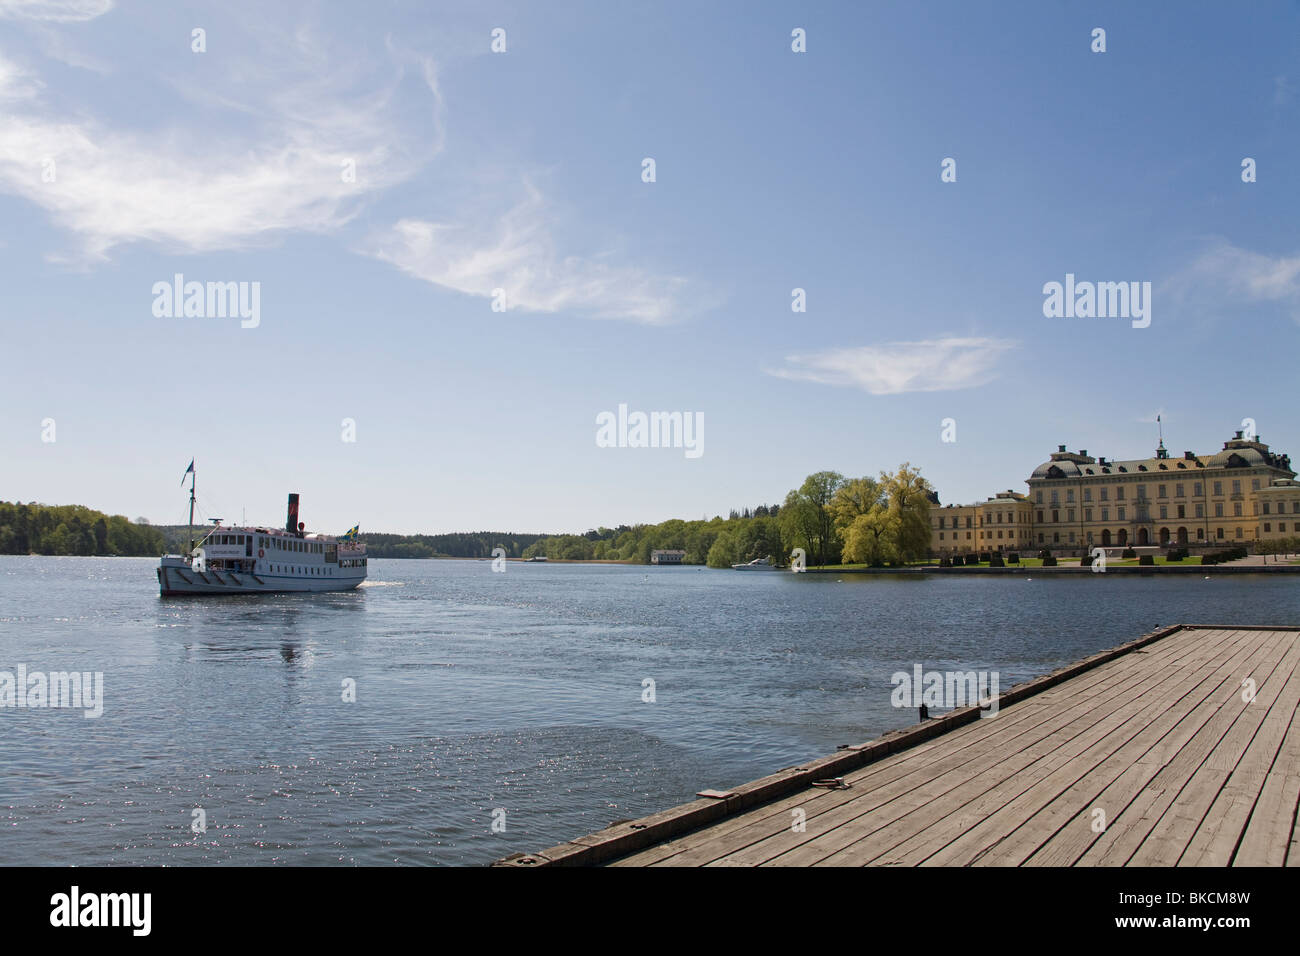 S/S Prins Carl Philip leaving the pier at the Royal Castle Drottningholm outside Stockholm Stock Photo